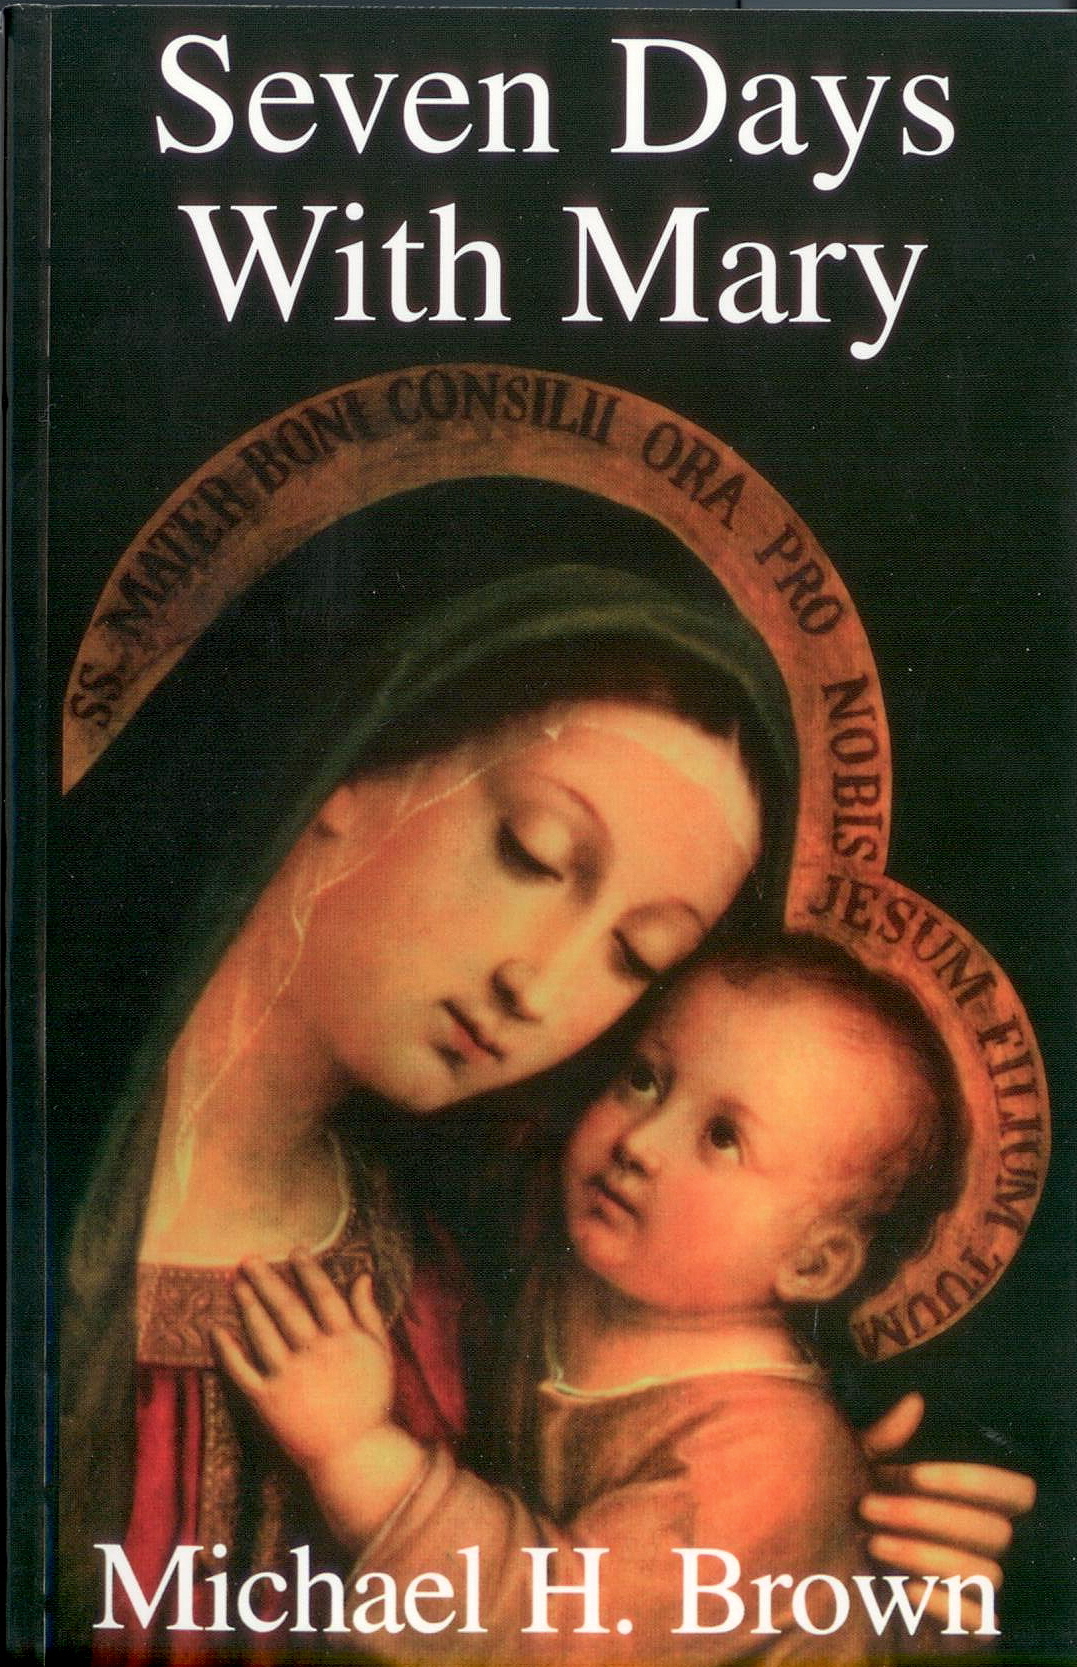 Seven Days With Mary by Michael H. Brown